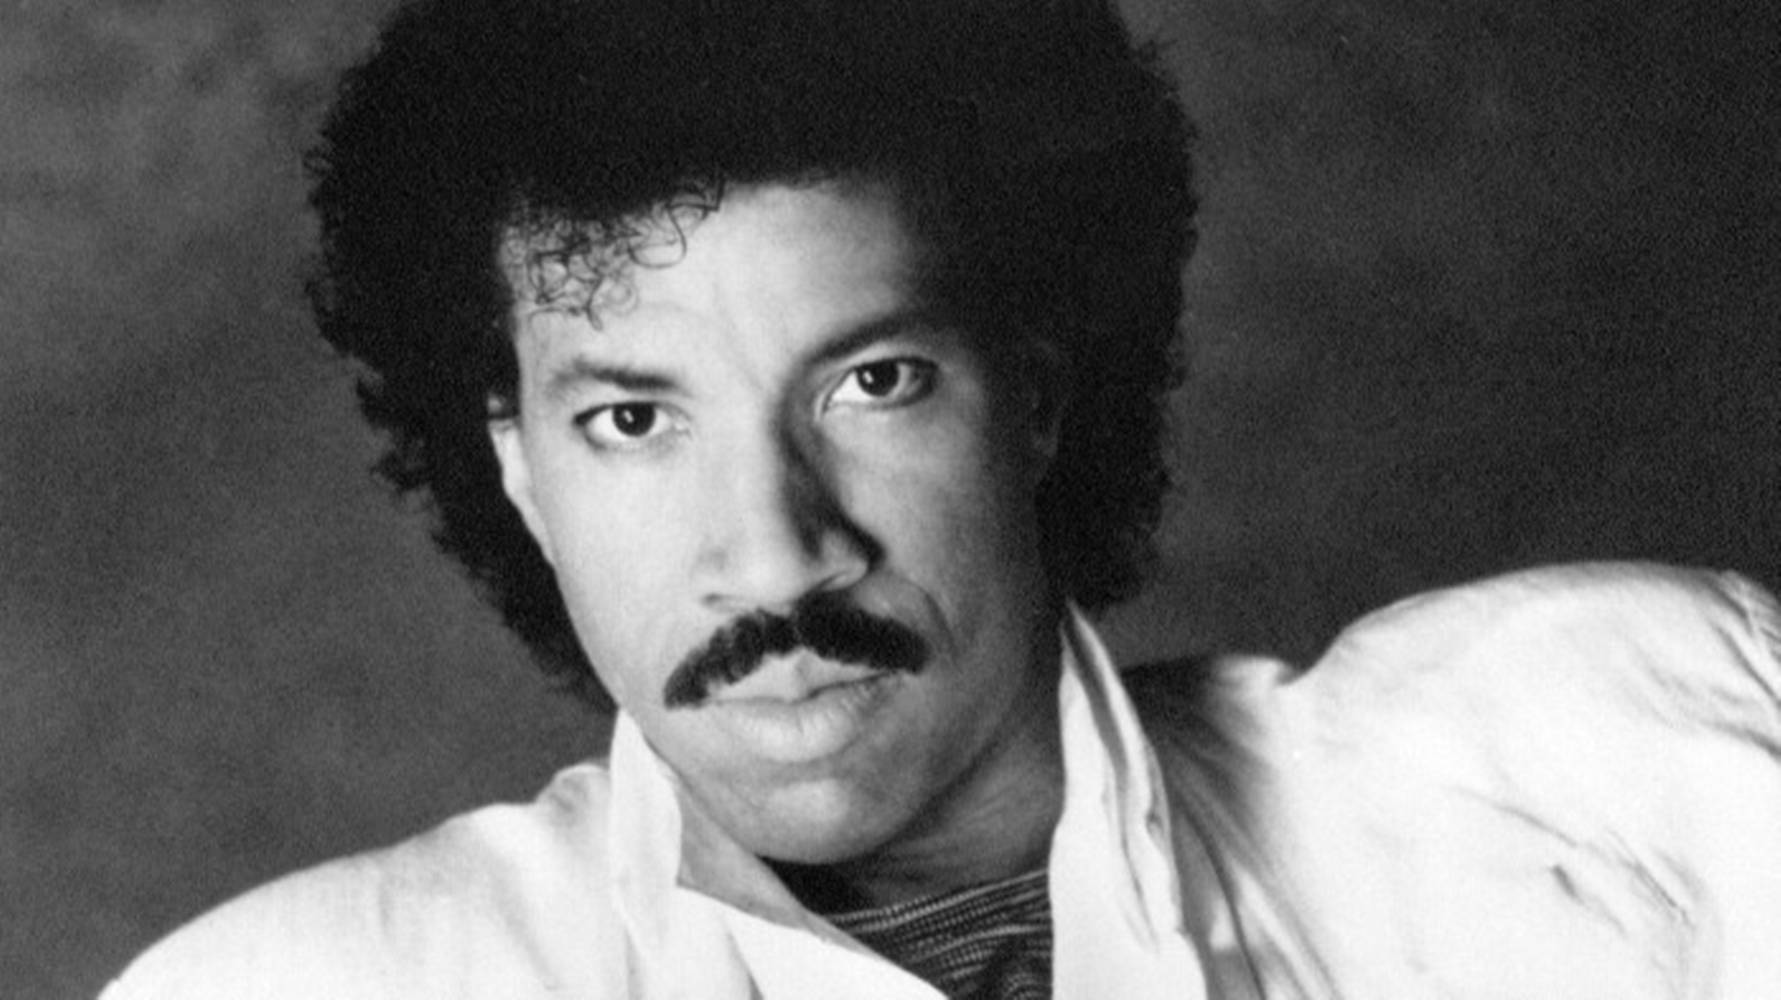 Top 999+ Lionel Richie Wallpapers Full HD, 4K✅Free to Use